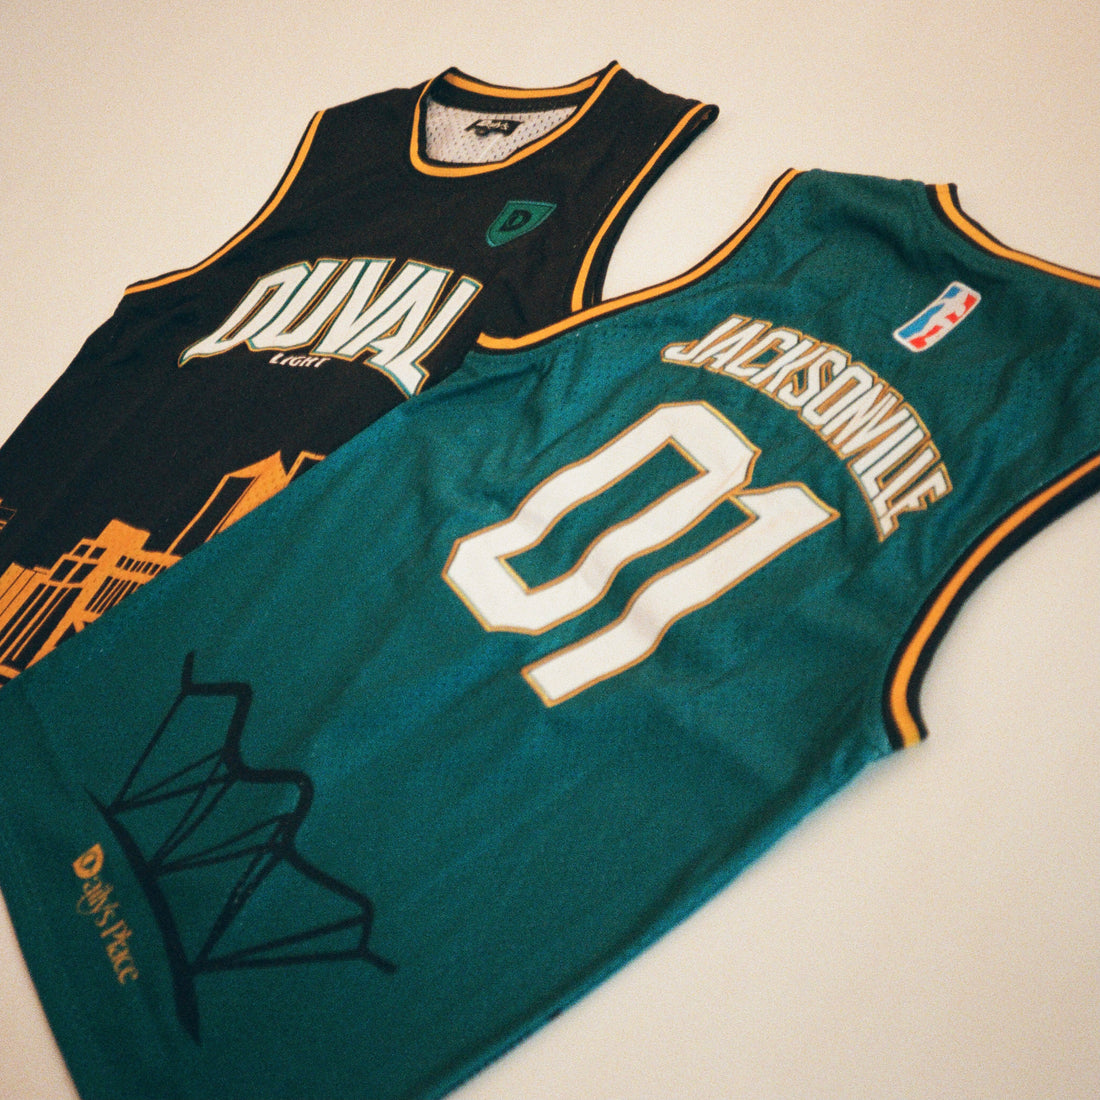 Duval Light Jersey - front and a back image of the jersey in a black and a teal version